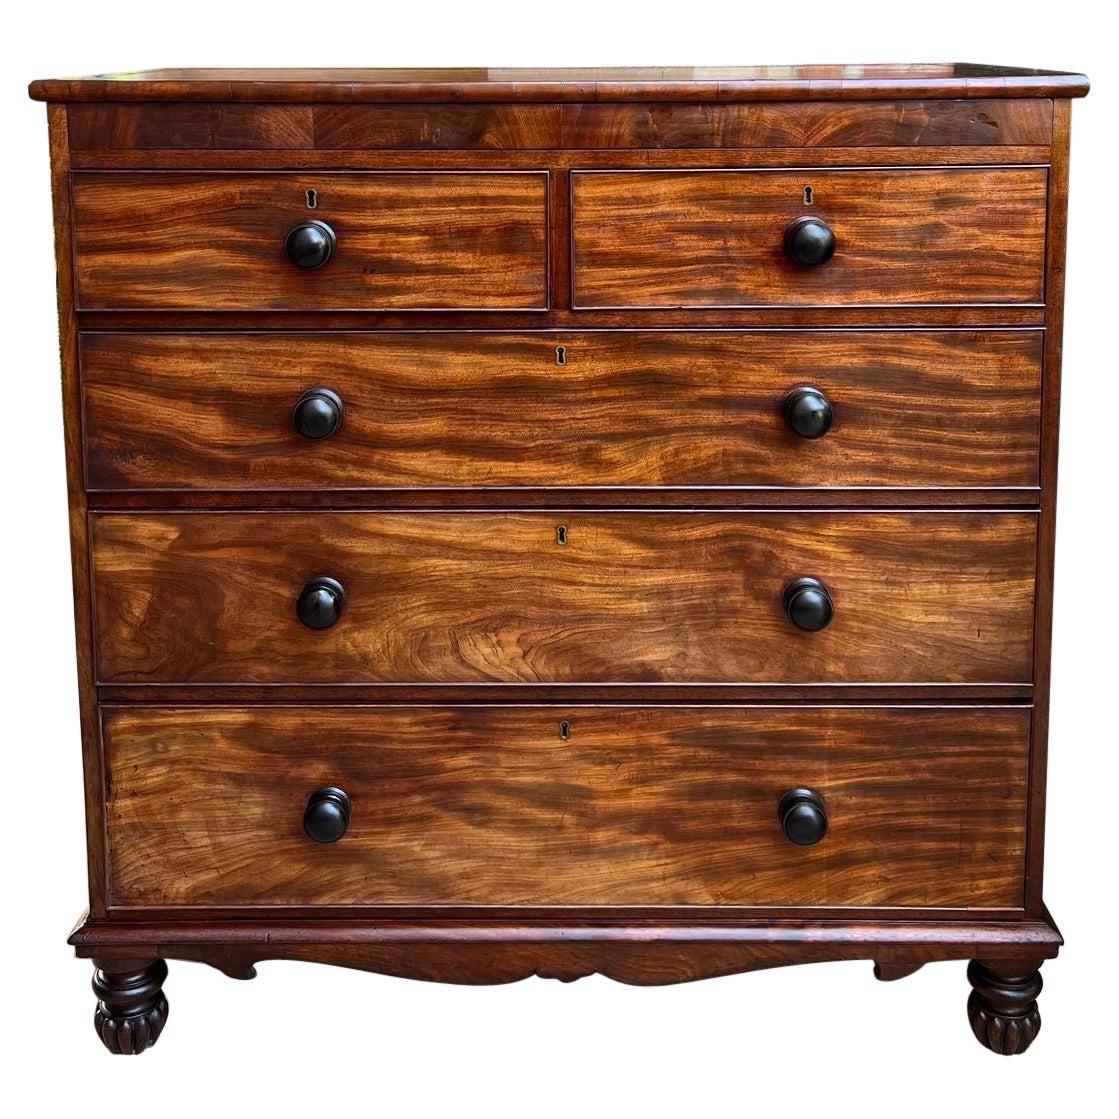 Antique English Chest of Drawers Burl Mahogany Victorian Dresser Cabinet For Sale